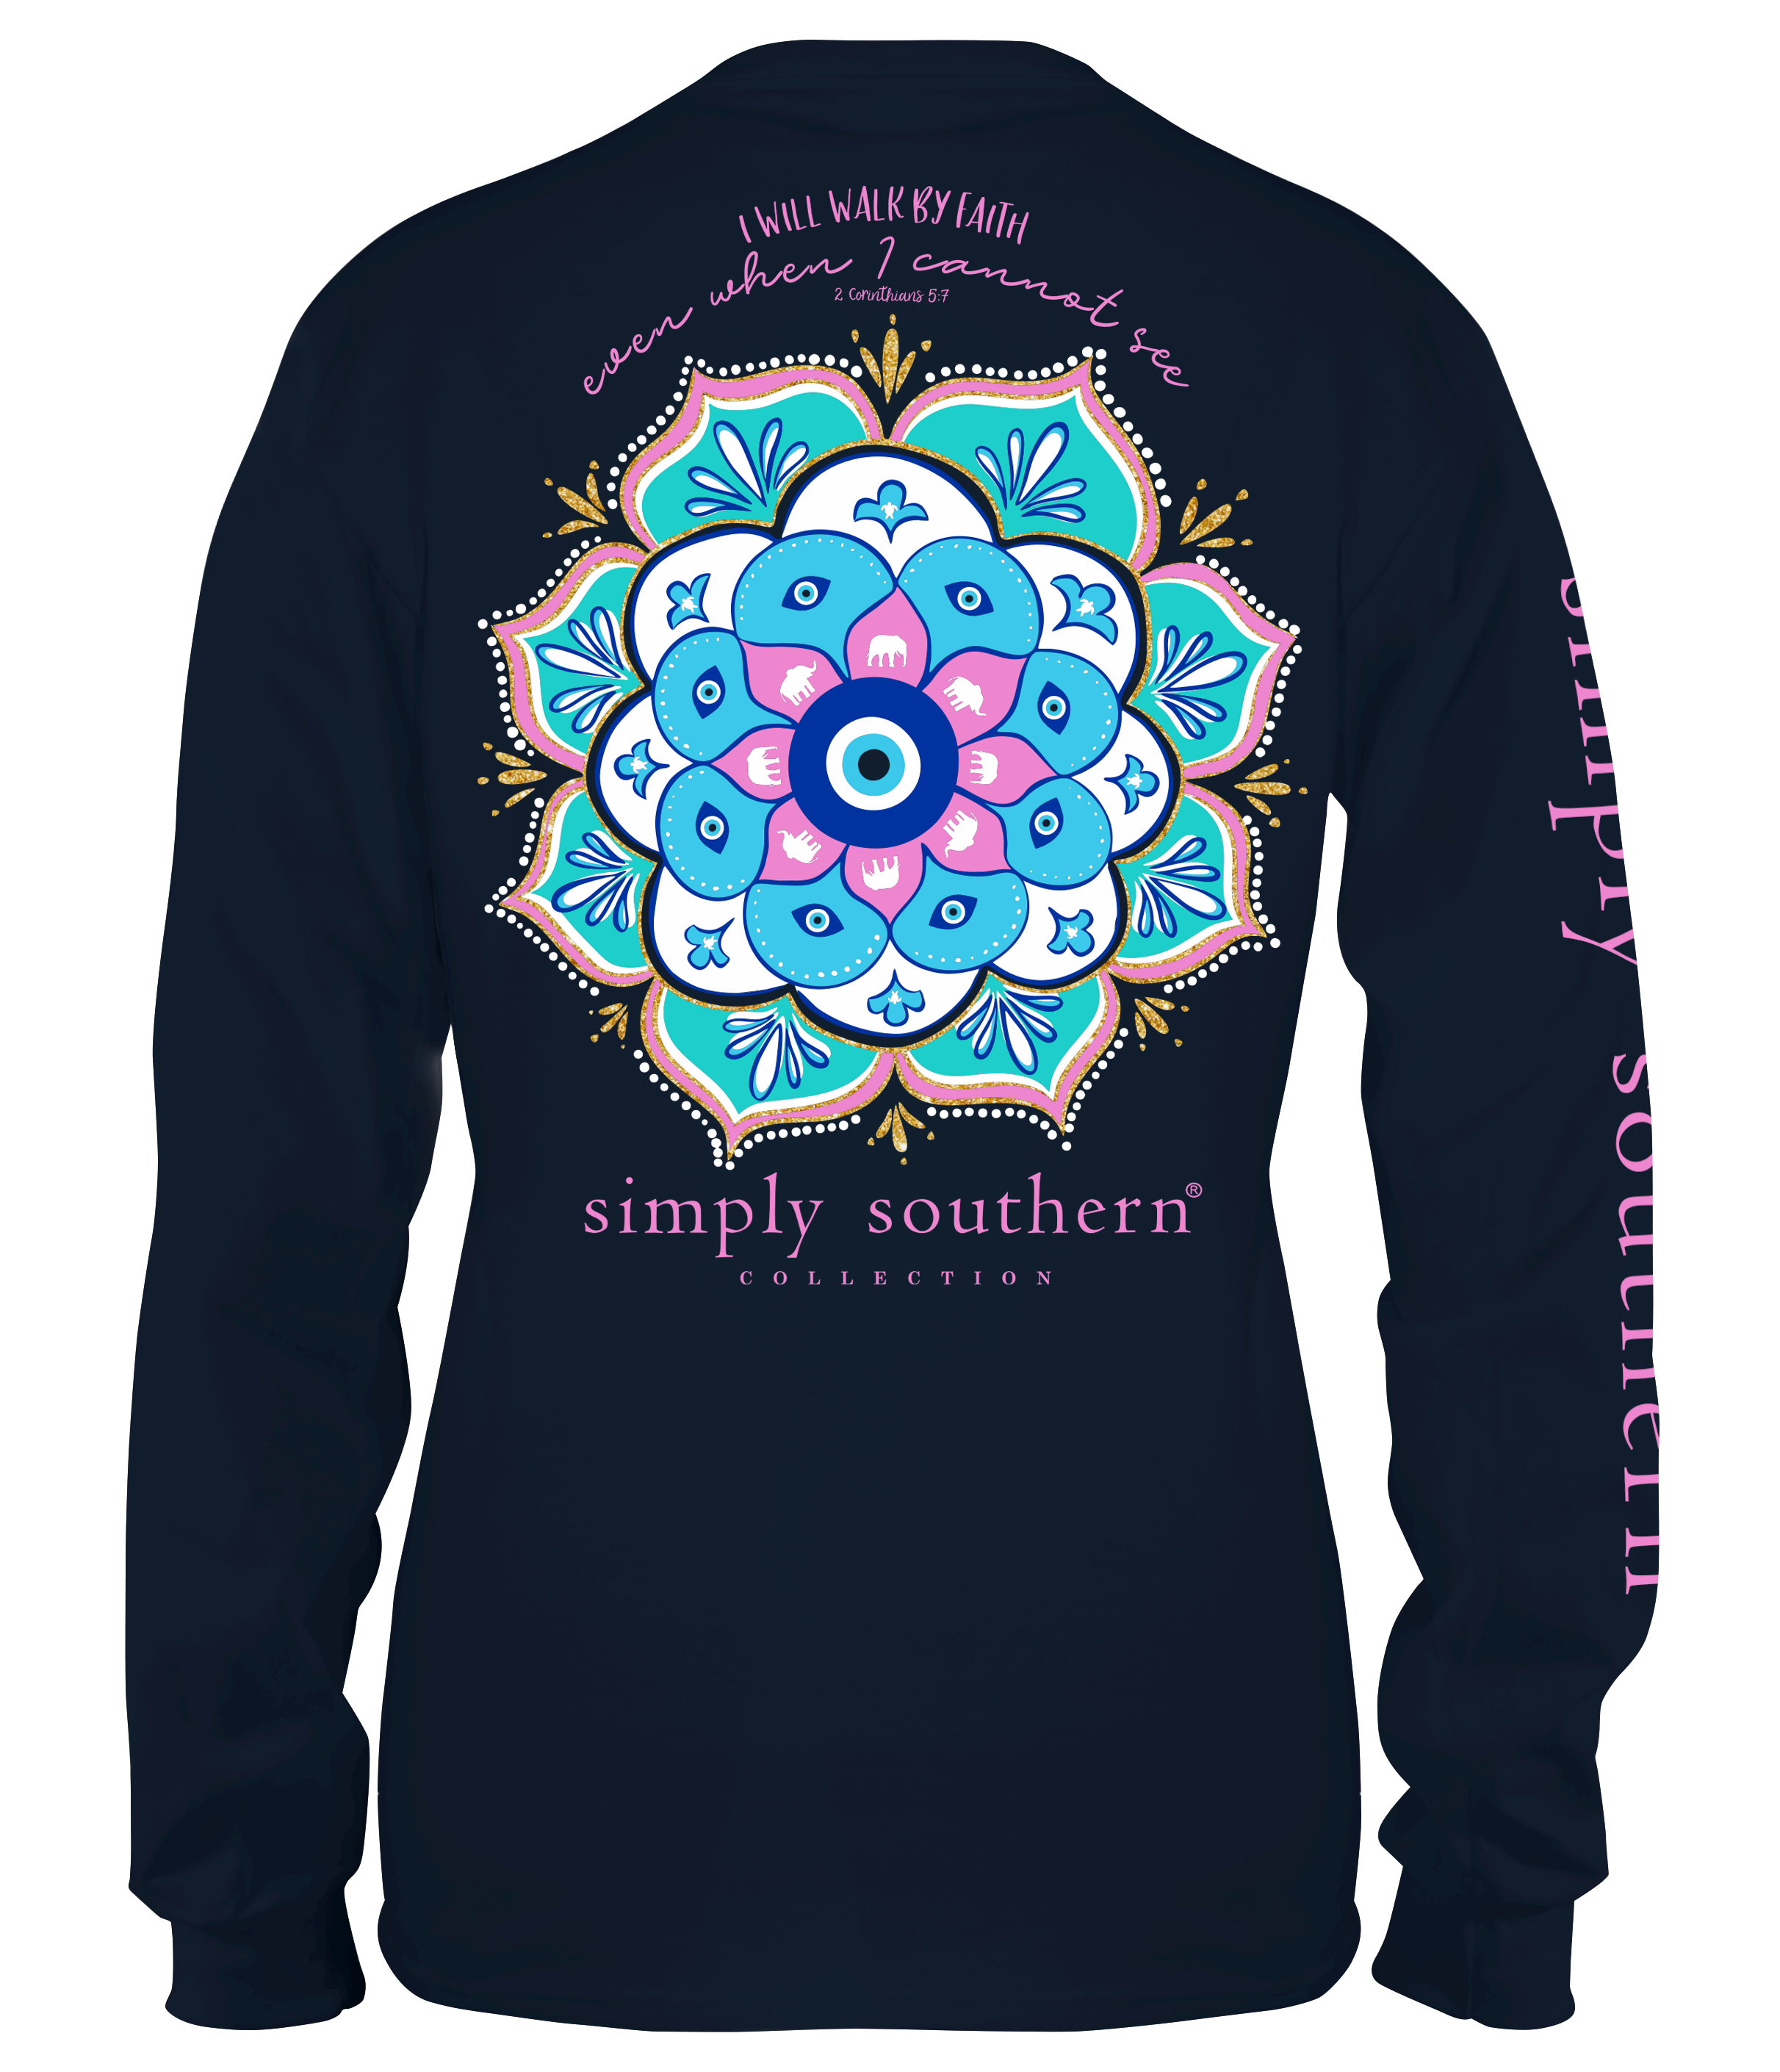 Youth 'Walk By Faith' Long Sleeve Tee by Simply Southern